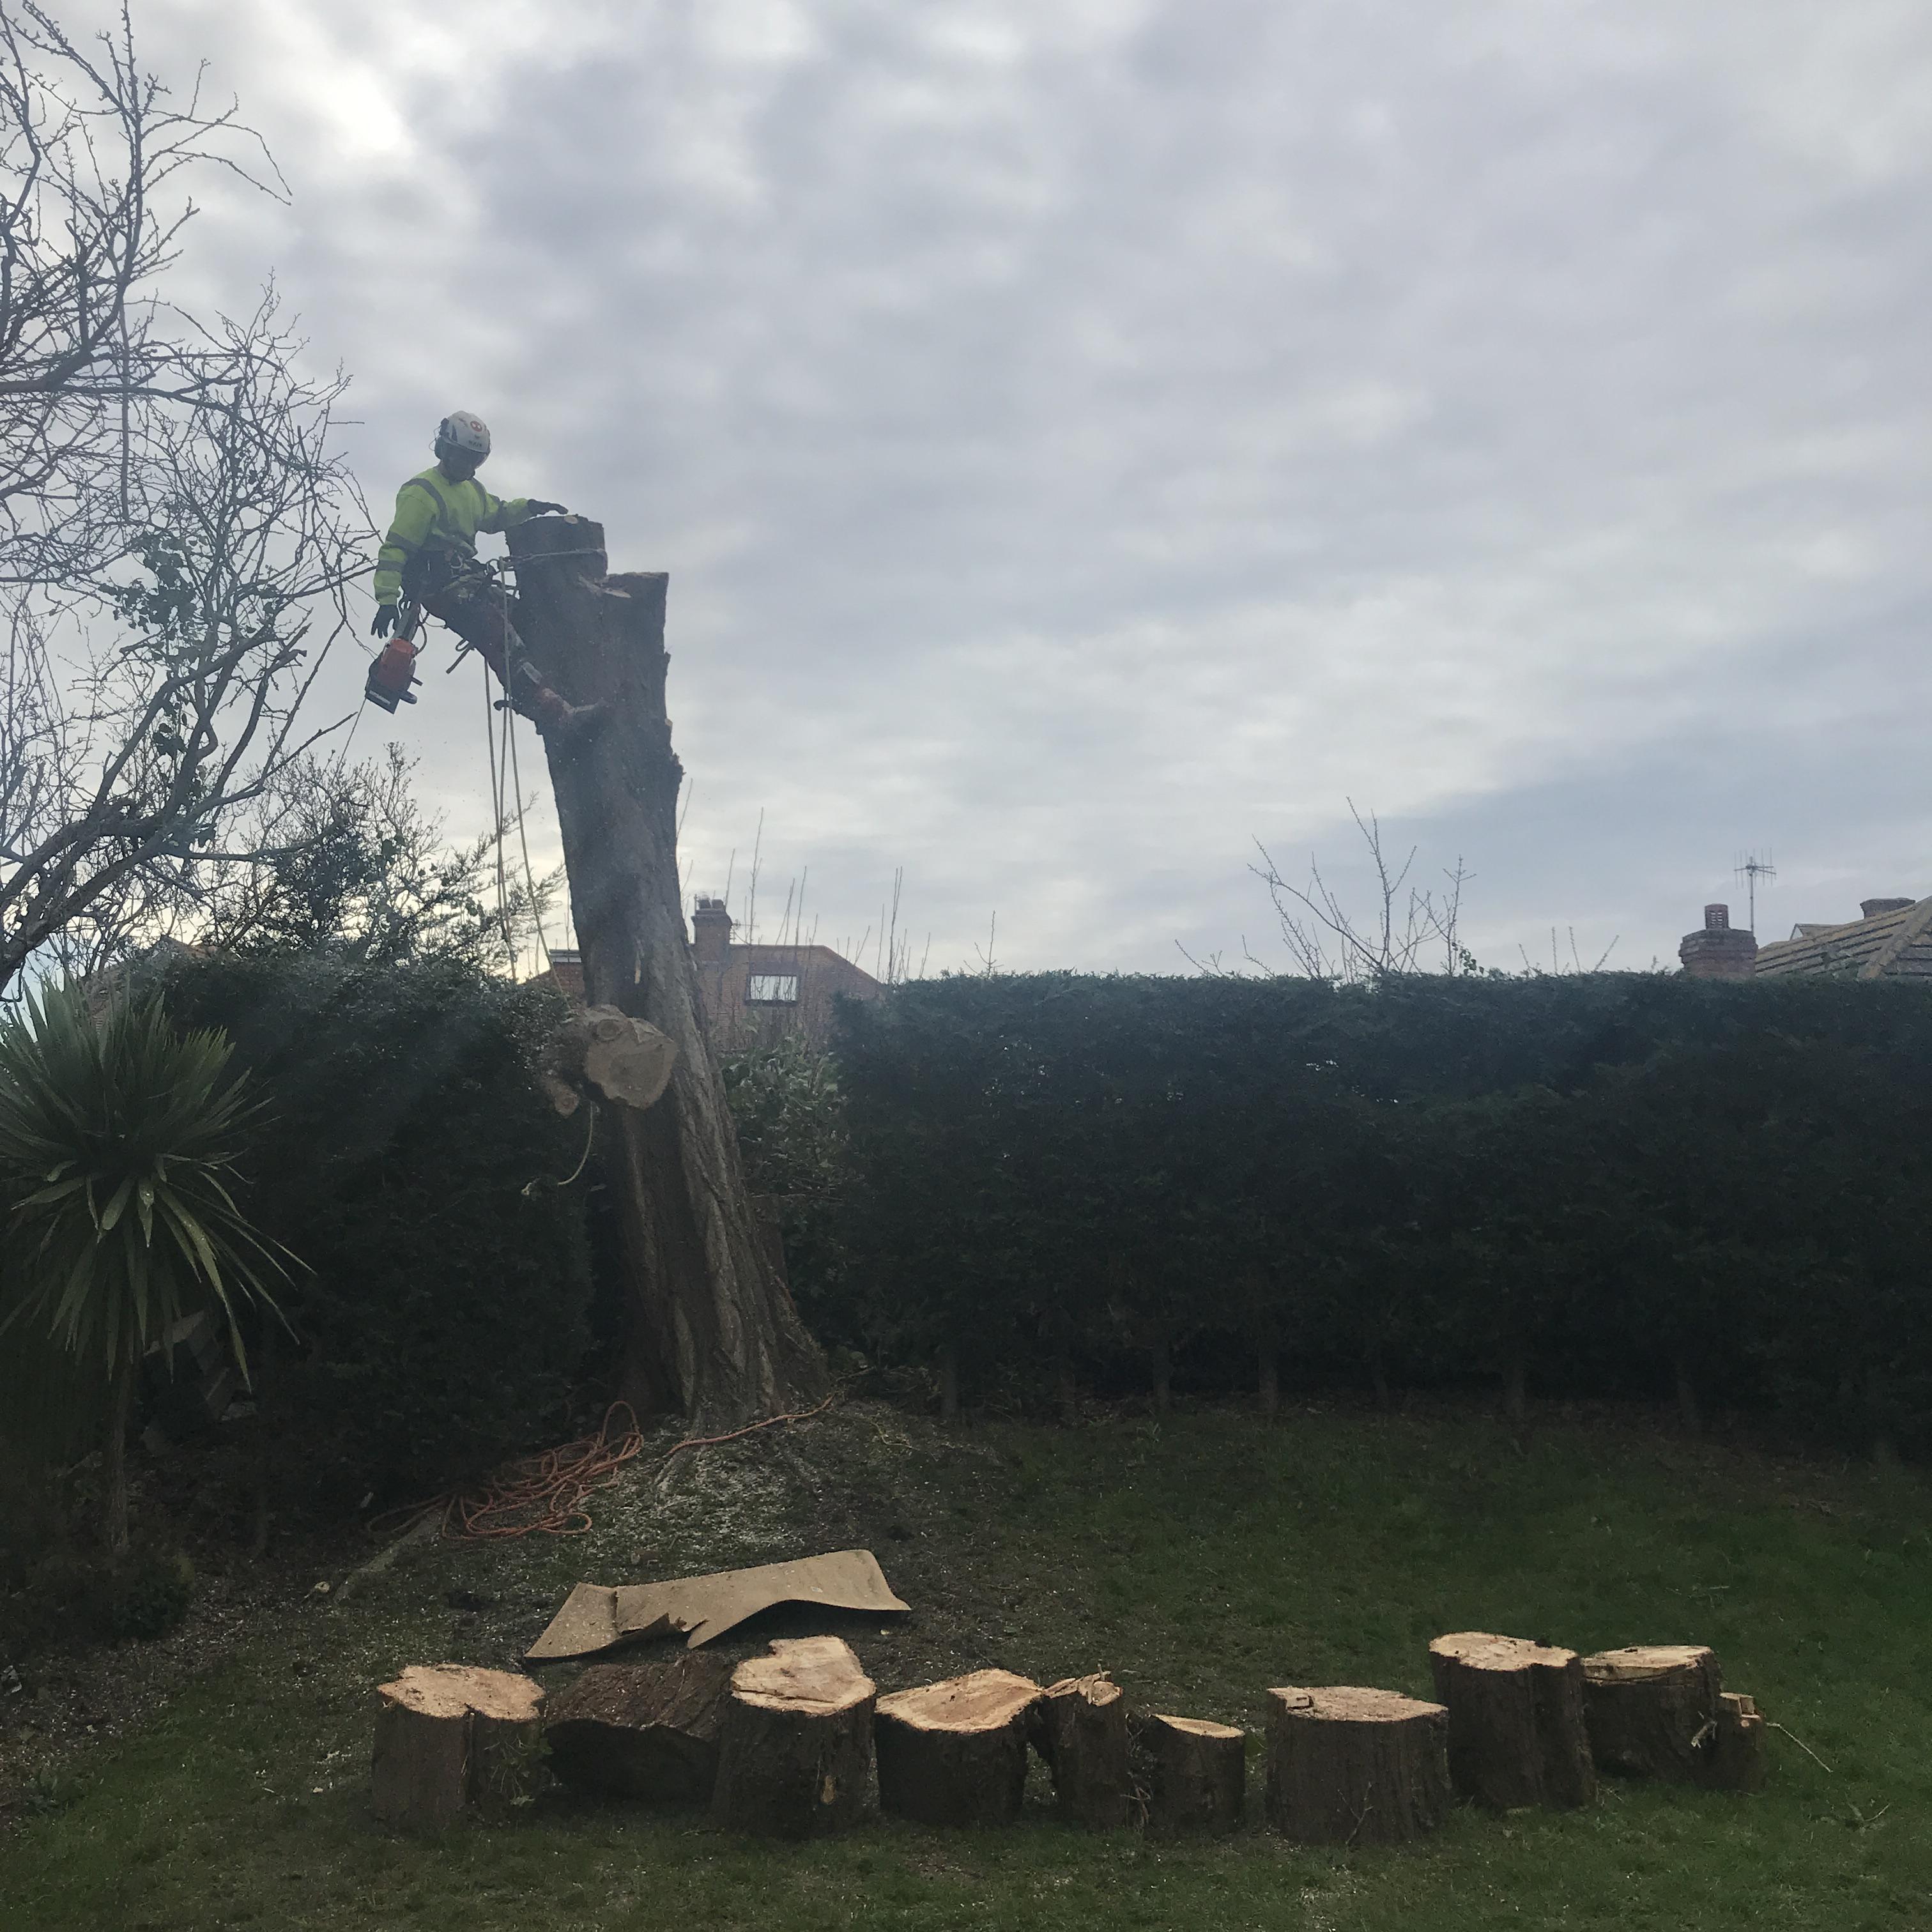 Tree removal in Weymouth, Dorchester, Portland - Tree Surgeon Weymouth - Tree climber spiking into a tree to dismantle the tree stem one section at a time.